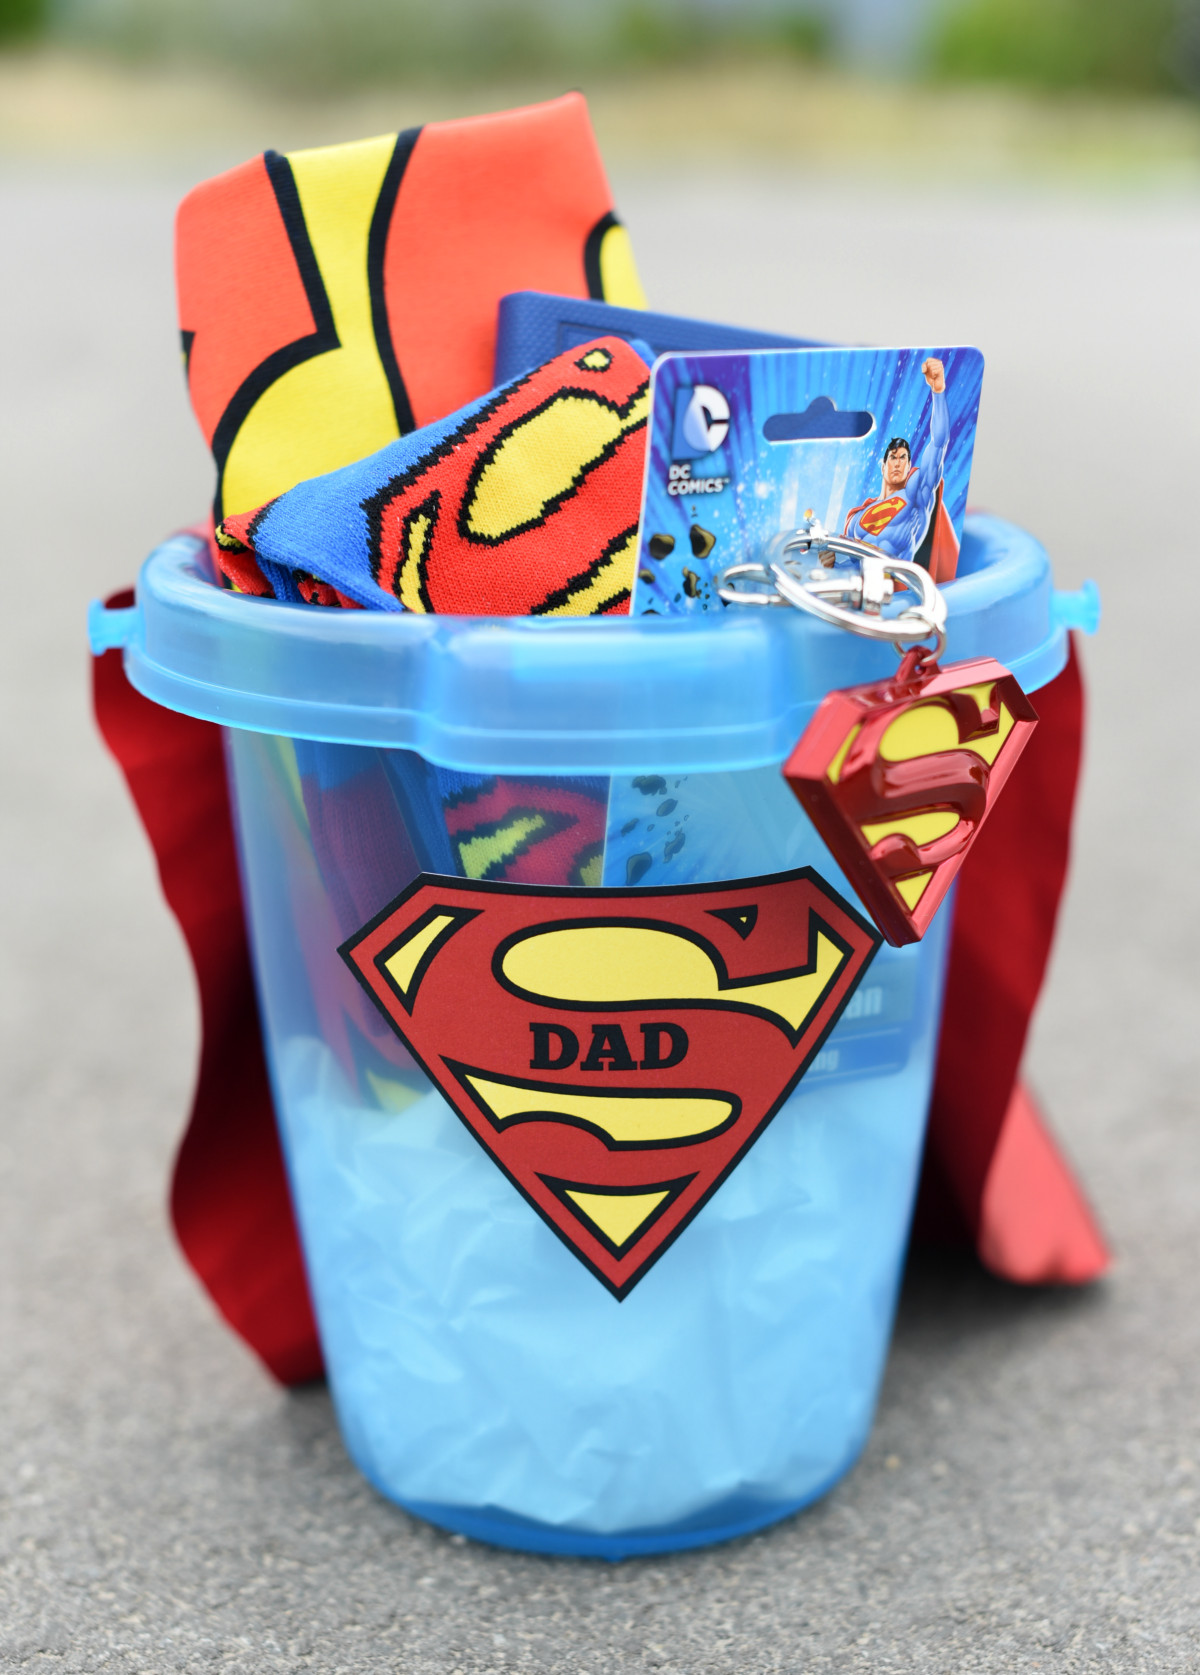 Dad Gift Basket Ideas
 25 Creative Father s Day Gifts Crazy Little Projects